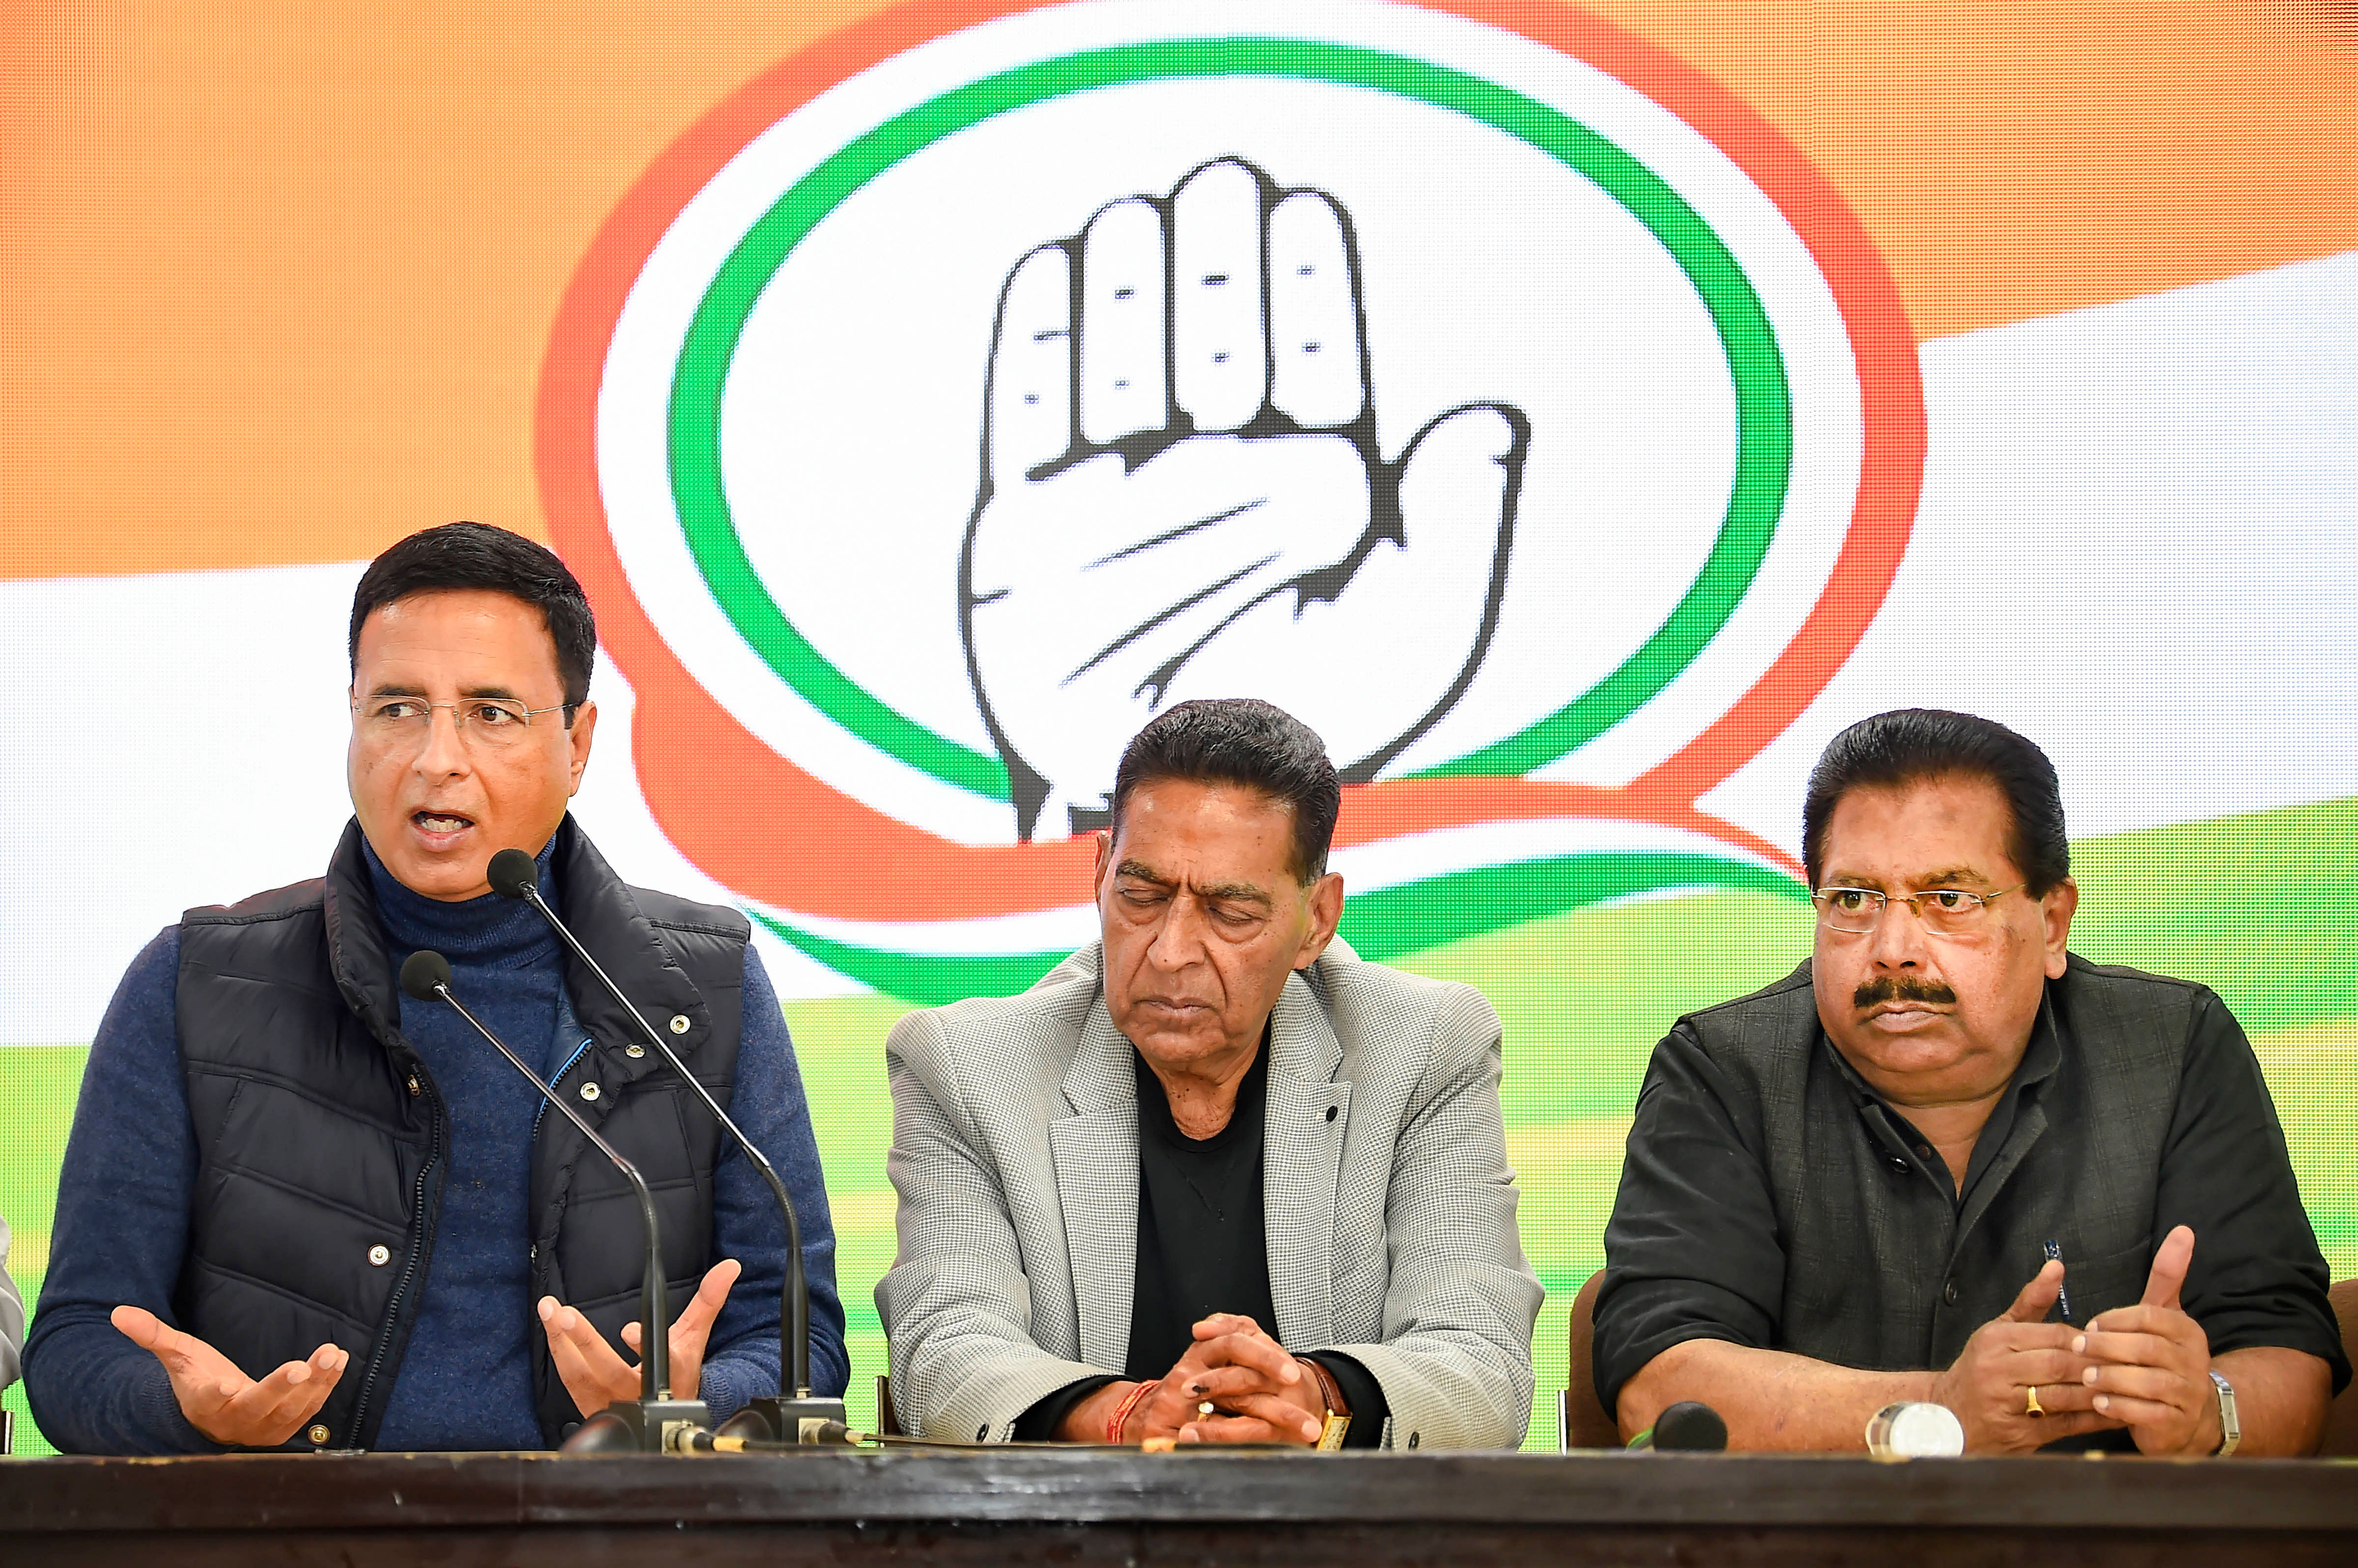  Congress spokesperson Randeep Singh Surjewala (L) addresses a press conference during the counting of votes for Delhi Assembly polls, in New Delhi. (PTI Photo)